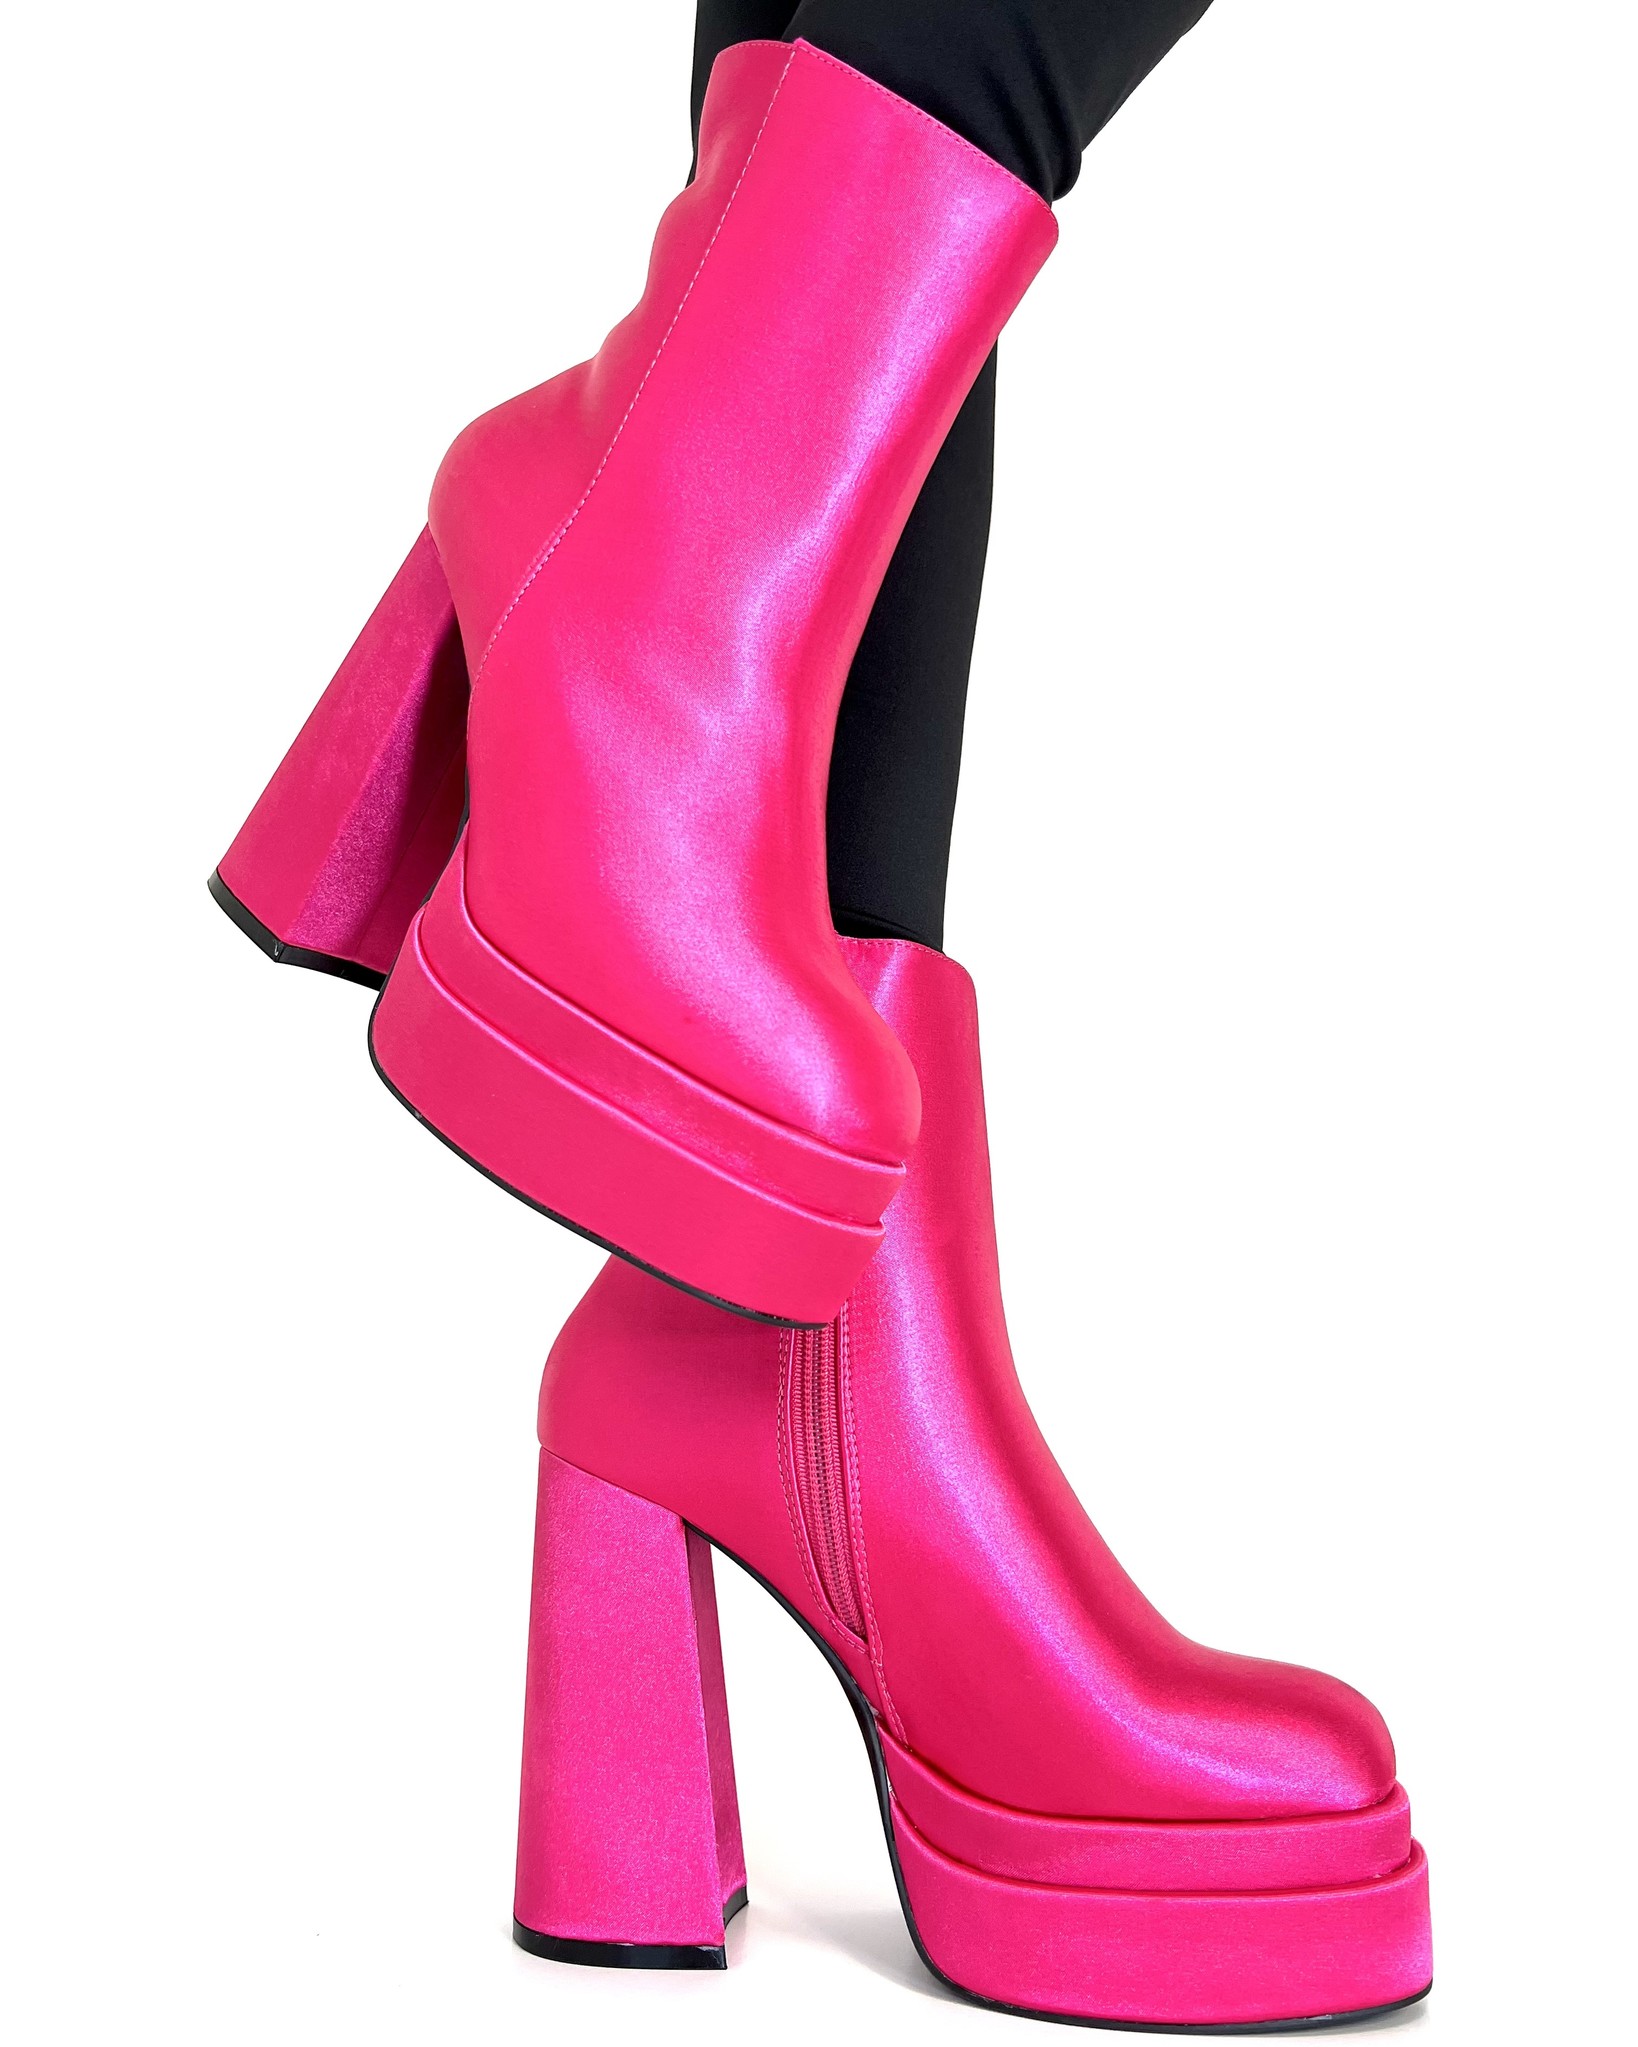 Women's Patent High Heel Ankle Boot | Patent high heels, High heel boots  ankle, Heeled ankle boots